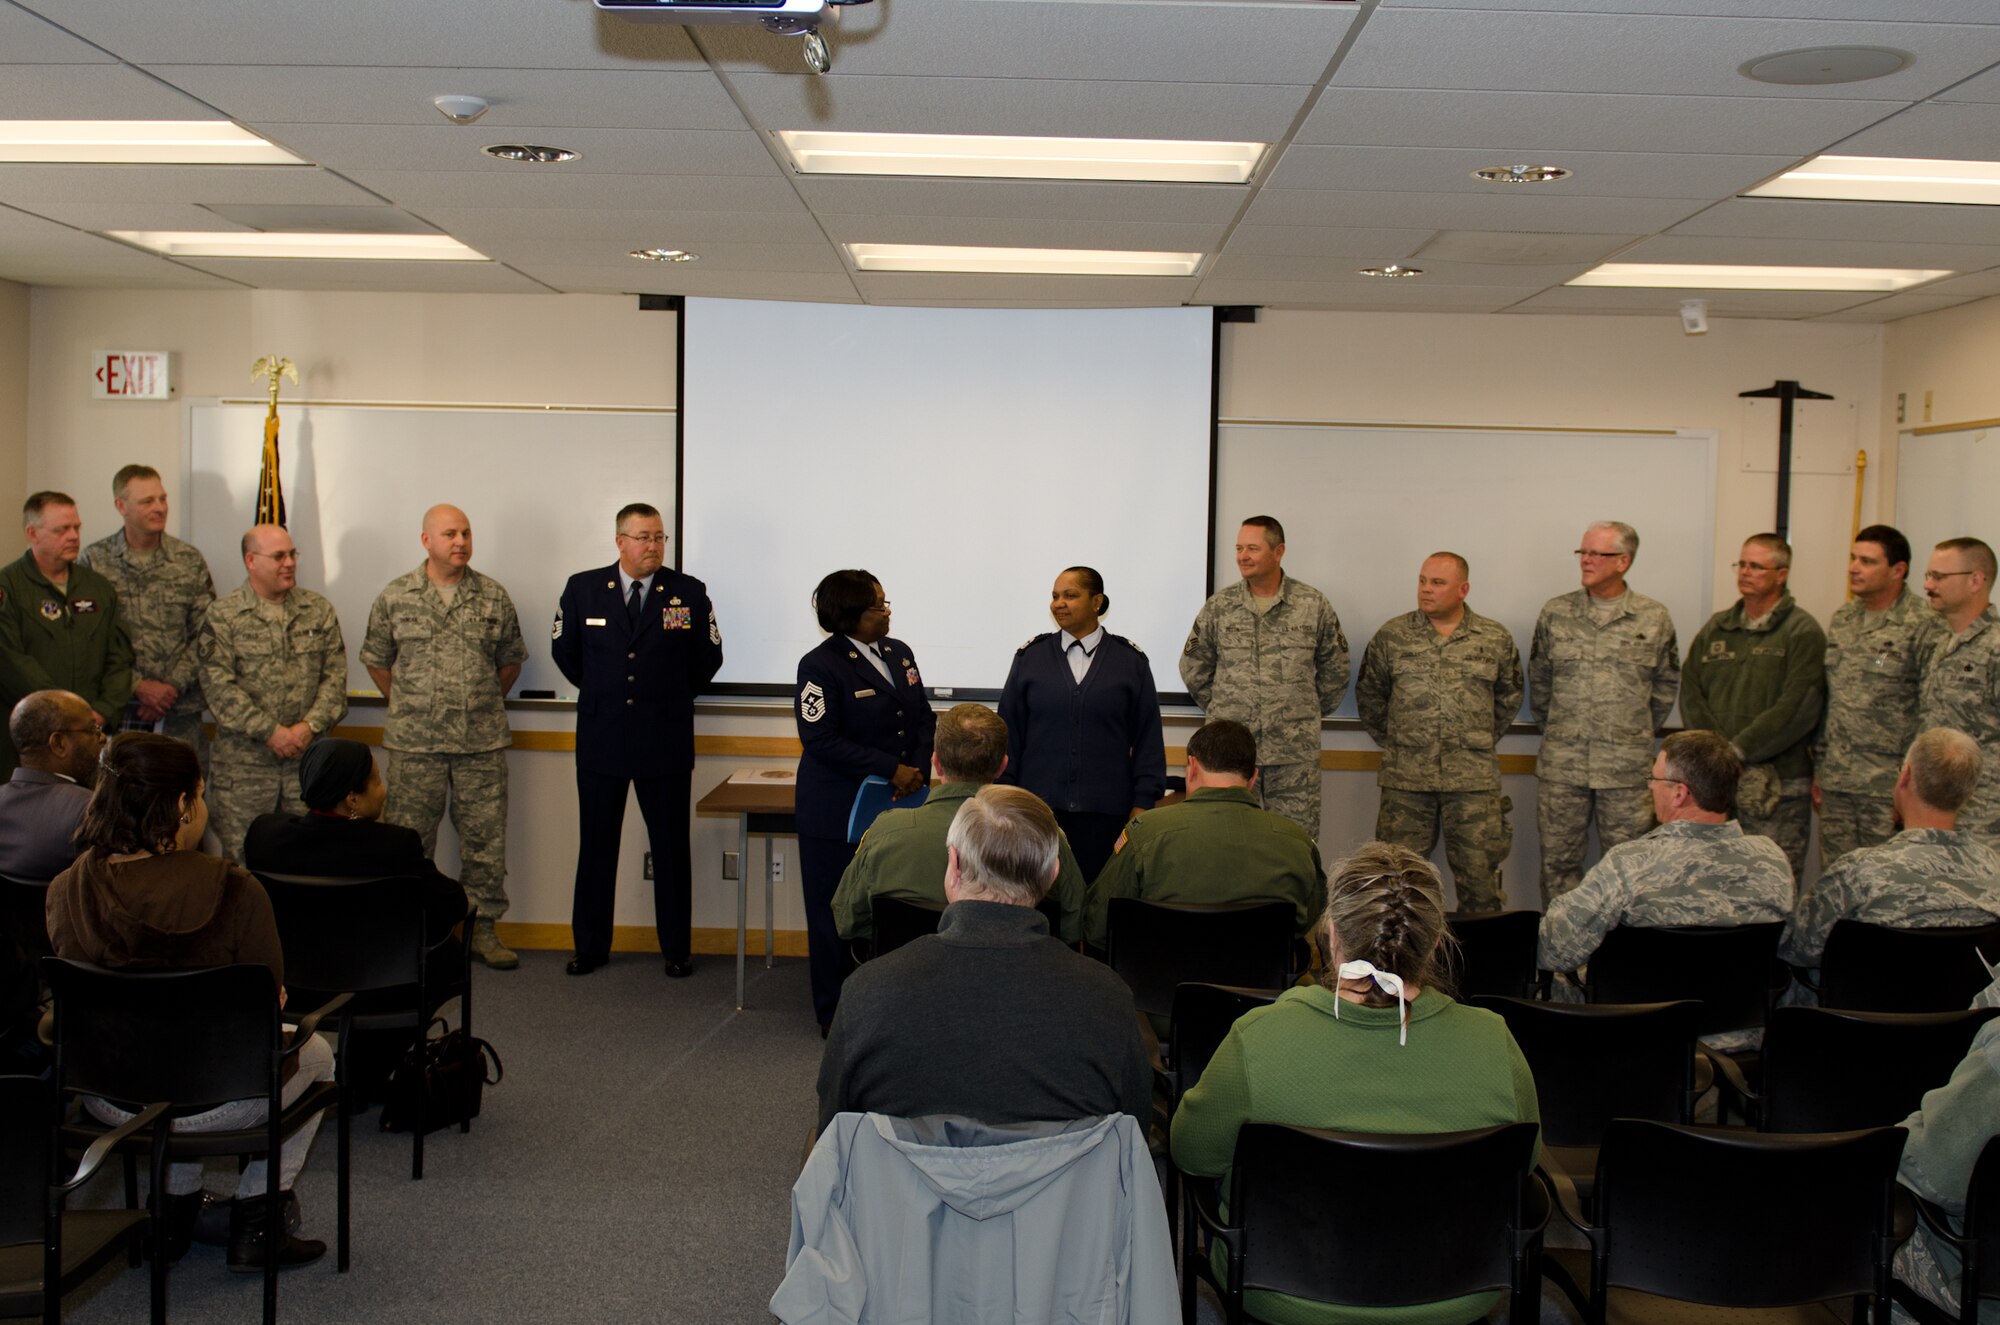 Senior Master Sgt. Morcie Whitley, 139th Human Resources Officer, was promoted to the rank of chief master sergeant at Rosecrans Air National Guard Base, St. Joseph, Mo., March 4, 2012. (Missouri Air National Guard photo by Staff Sgt. Michael Crane)